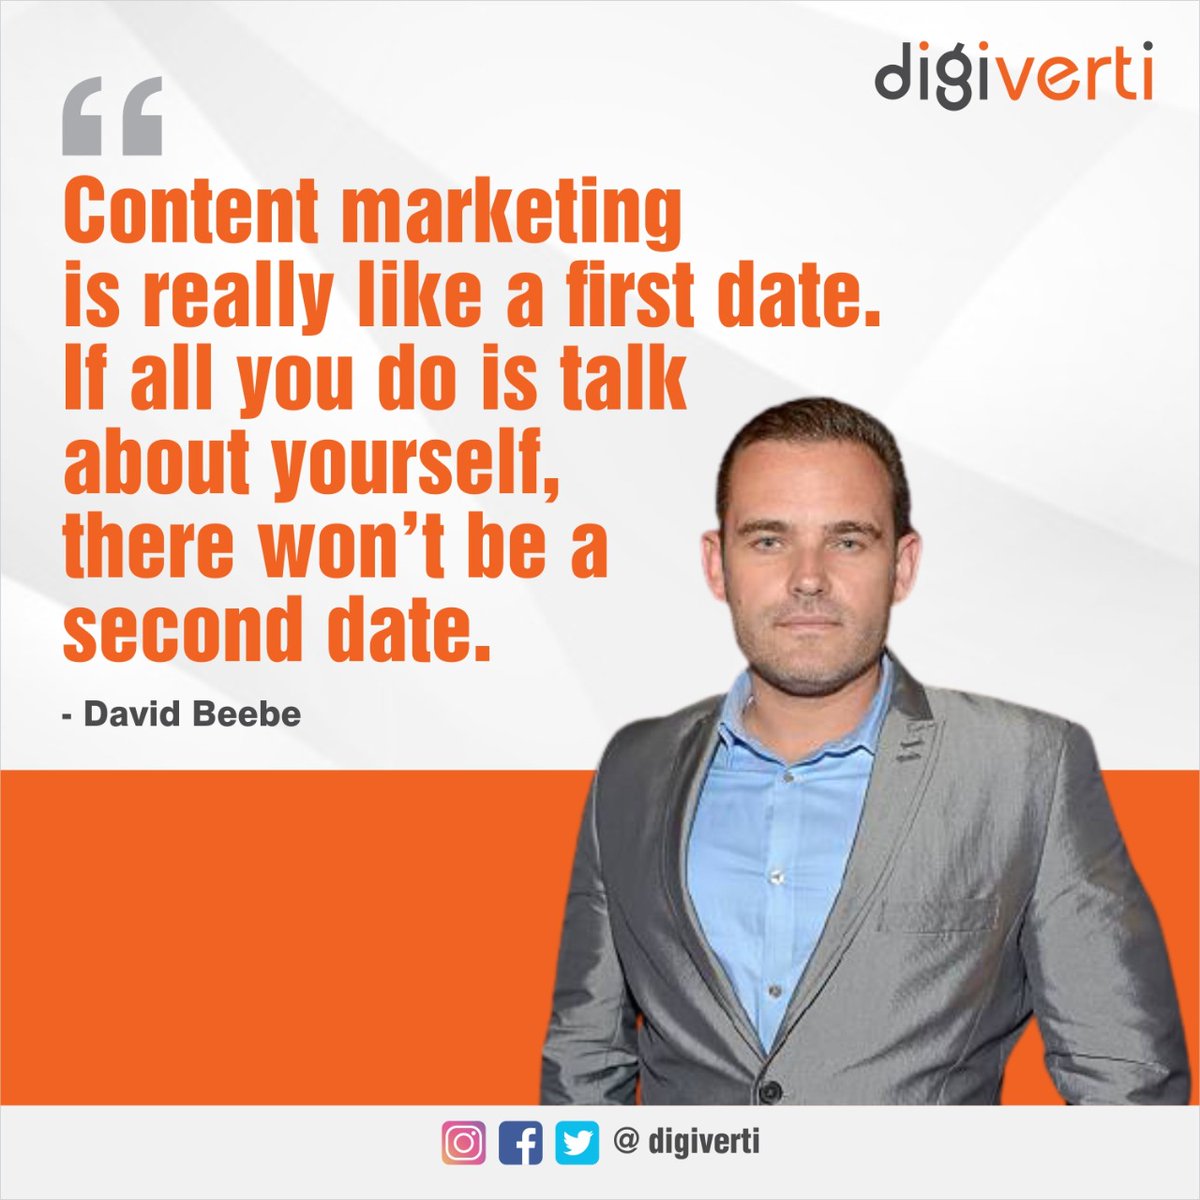 Content marketing is really like a first date. If all you do is talk about yourself, there won't be a second date.
- David Beebe
#ťhoghtoftheday💭 #Digivertical #Digiverti #DigitalIndia #Bangalore #digitalmarketing #marketing #socialmediamarketing #socialmedia #business